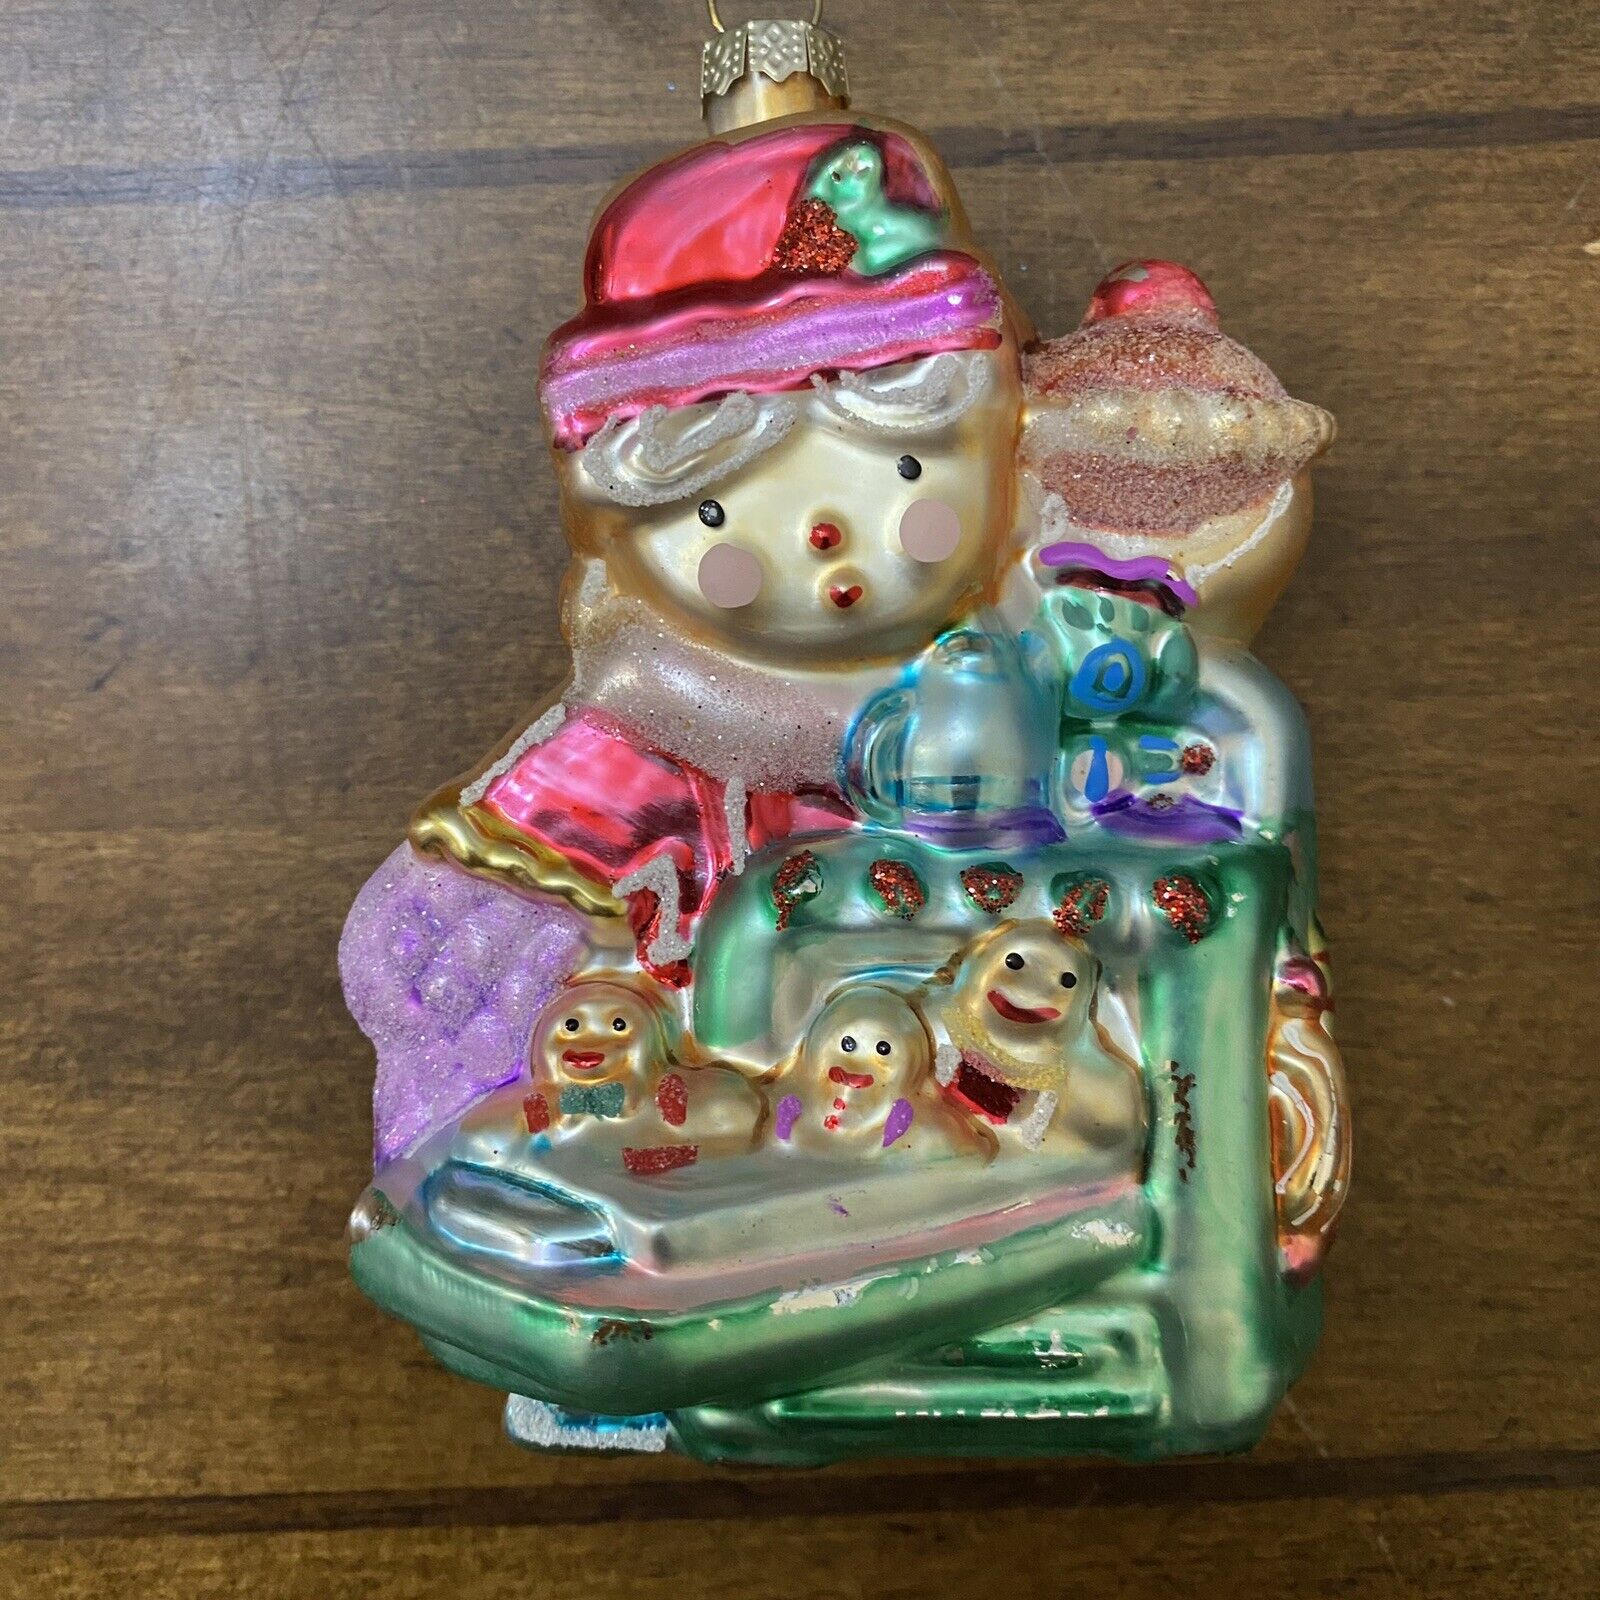 Gingerbread Girl Baker Glass Christmas Ornament Cupcake Pie Cookies in Oven 5”